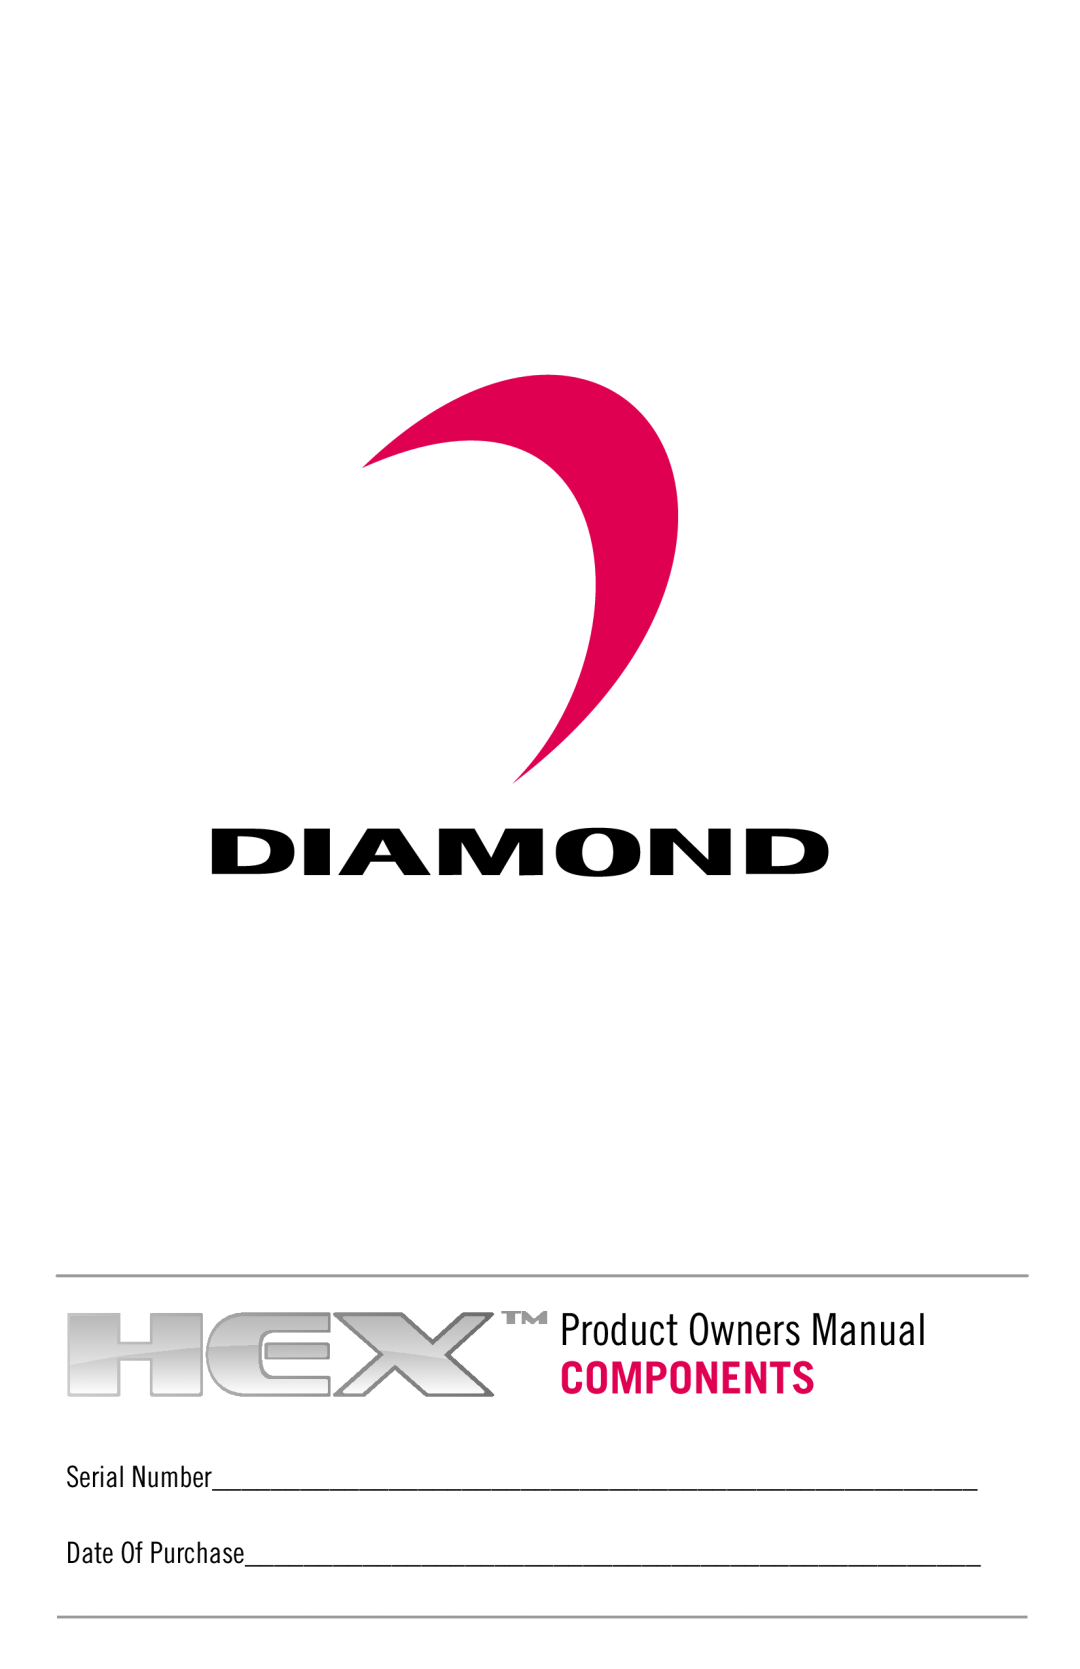 Diamond 643-104, 643-105 owner manual Components 